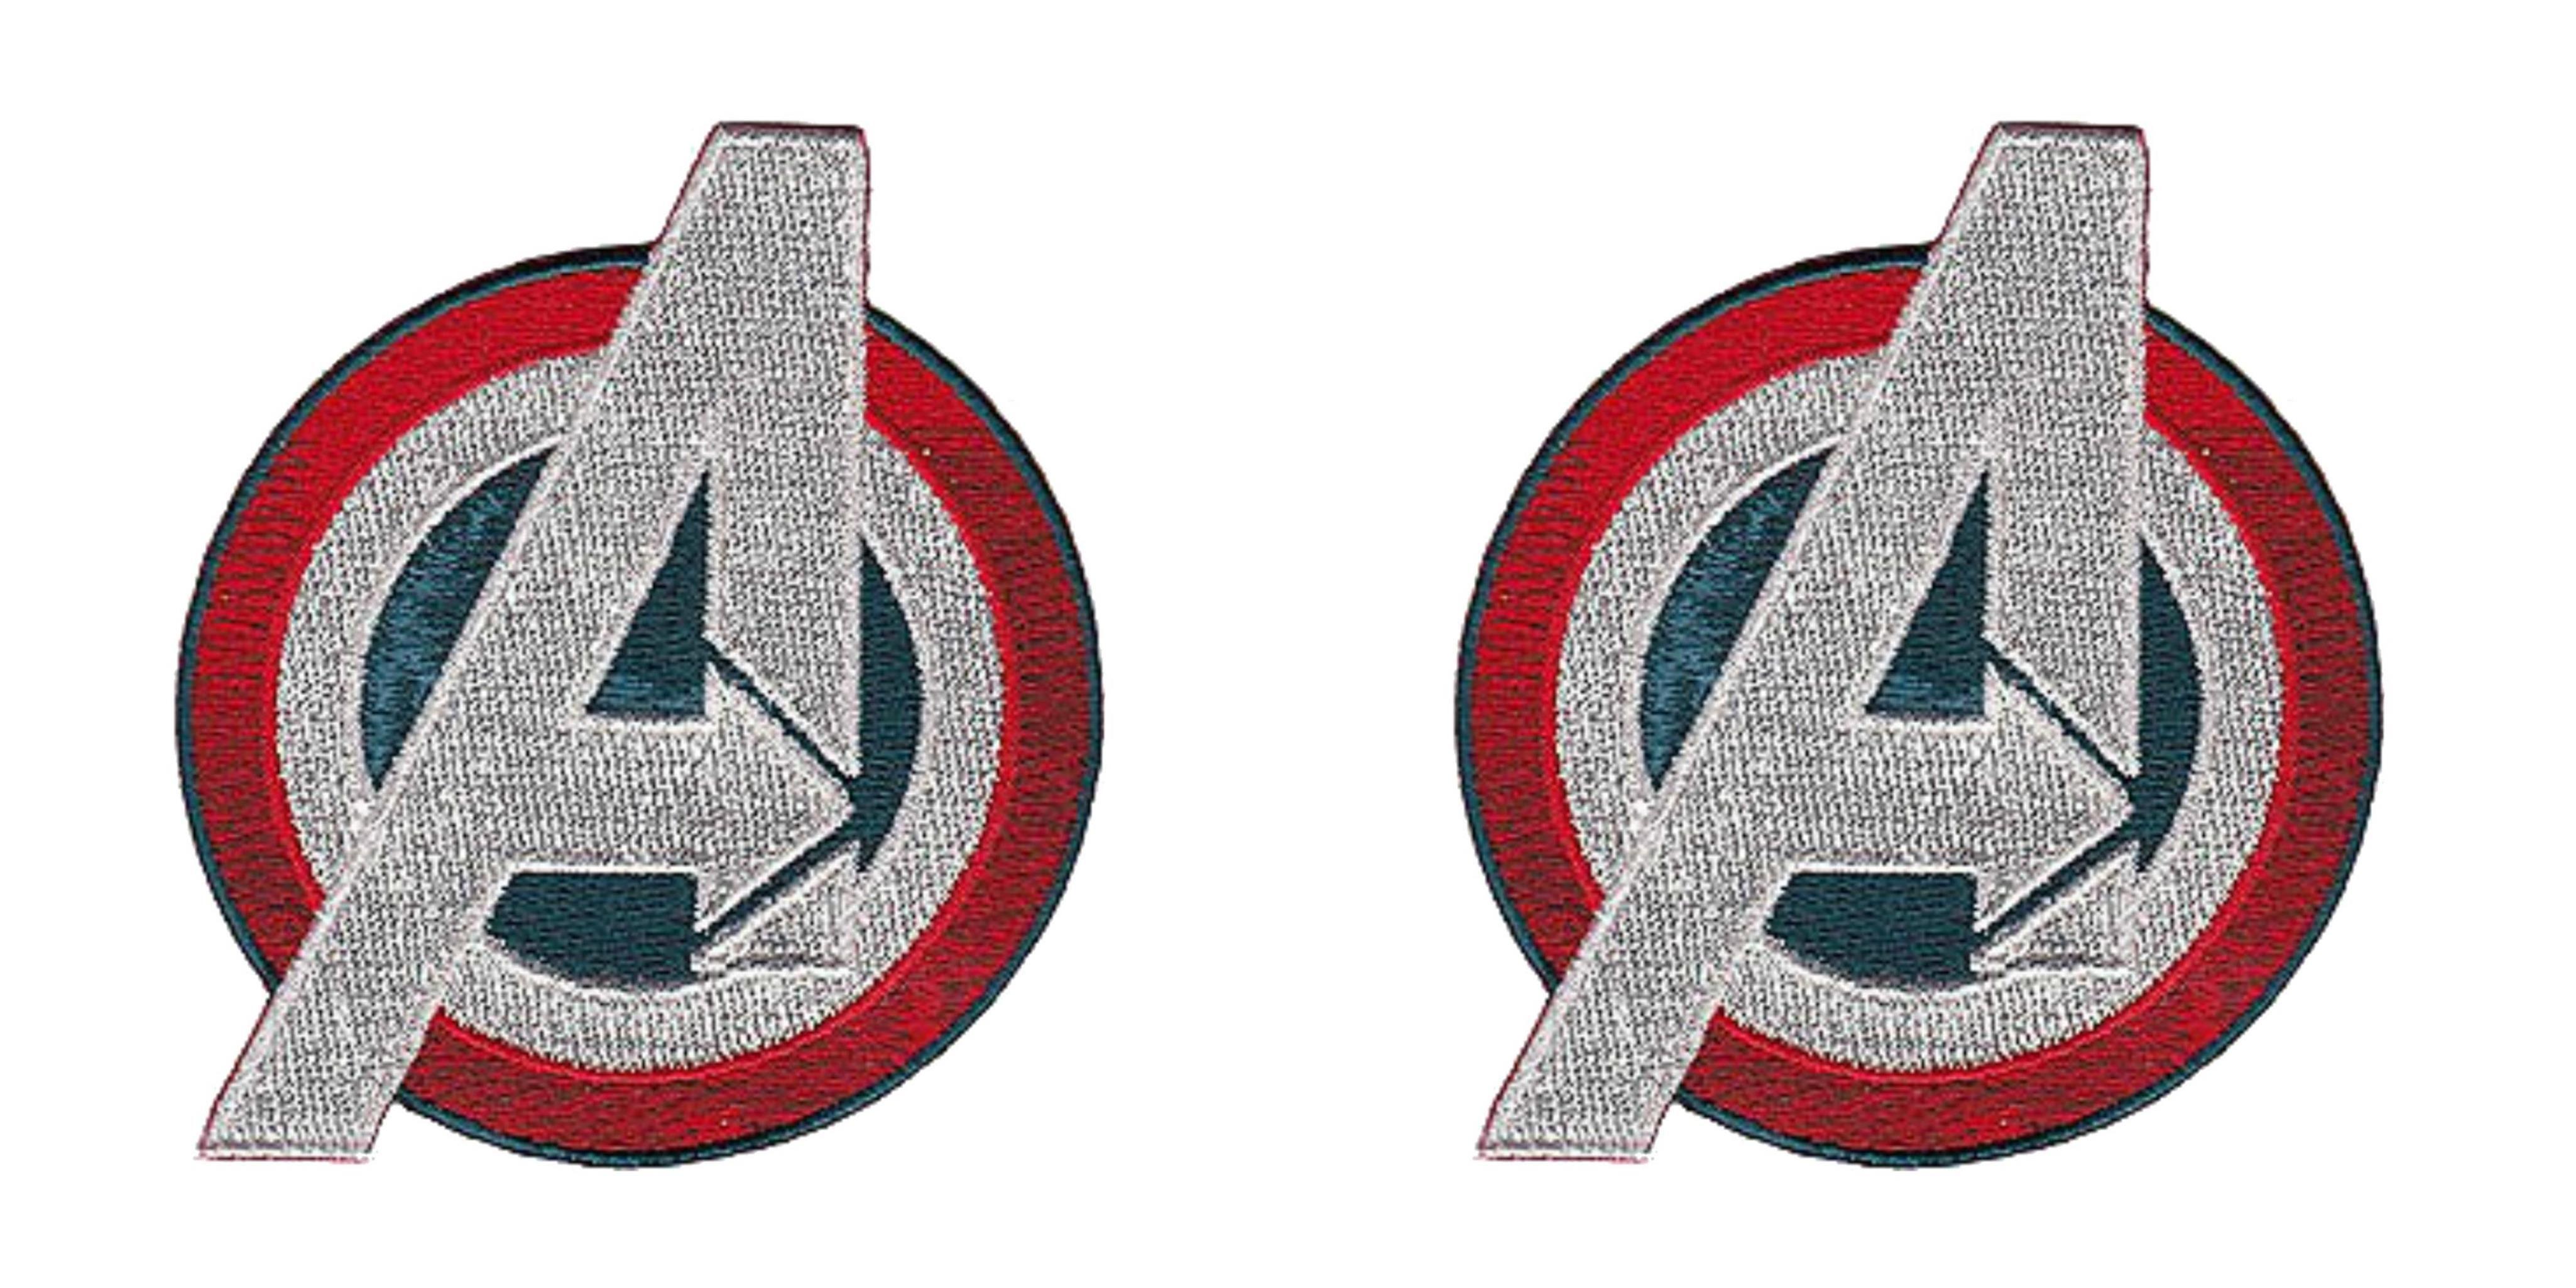 Red White and Blue Oval Logo - Superheroes Marvel Comics Avengers Red, White, and Blue Logo 3